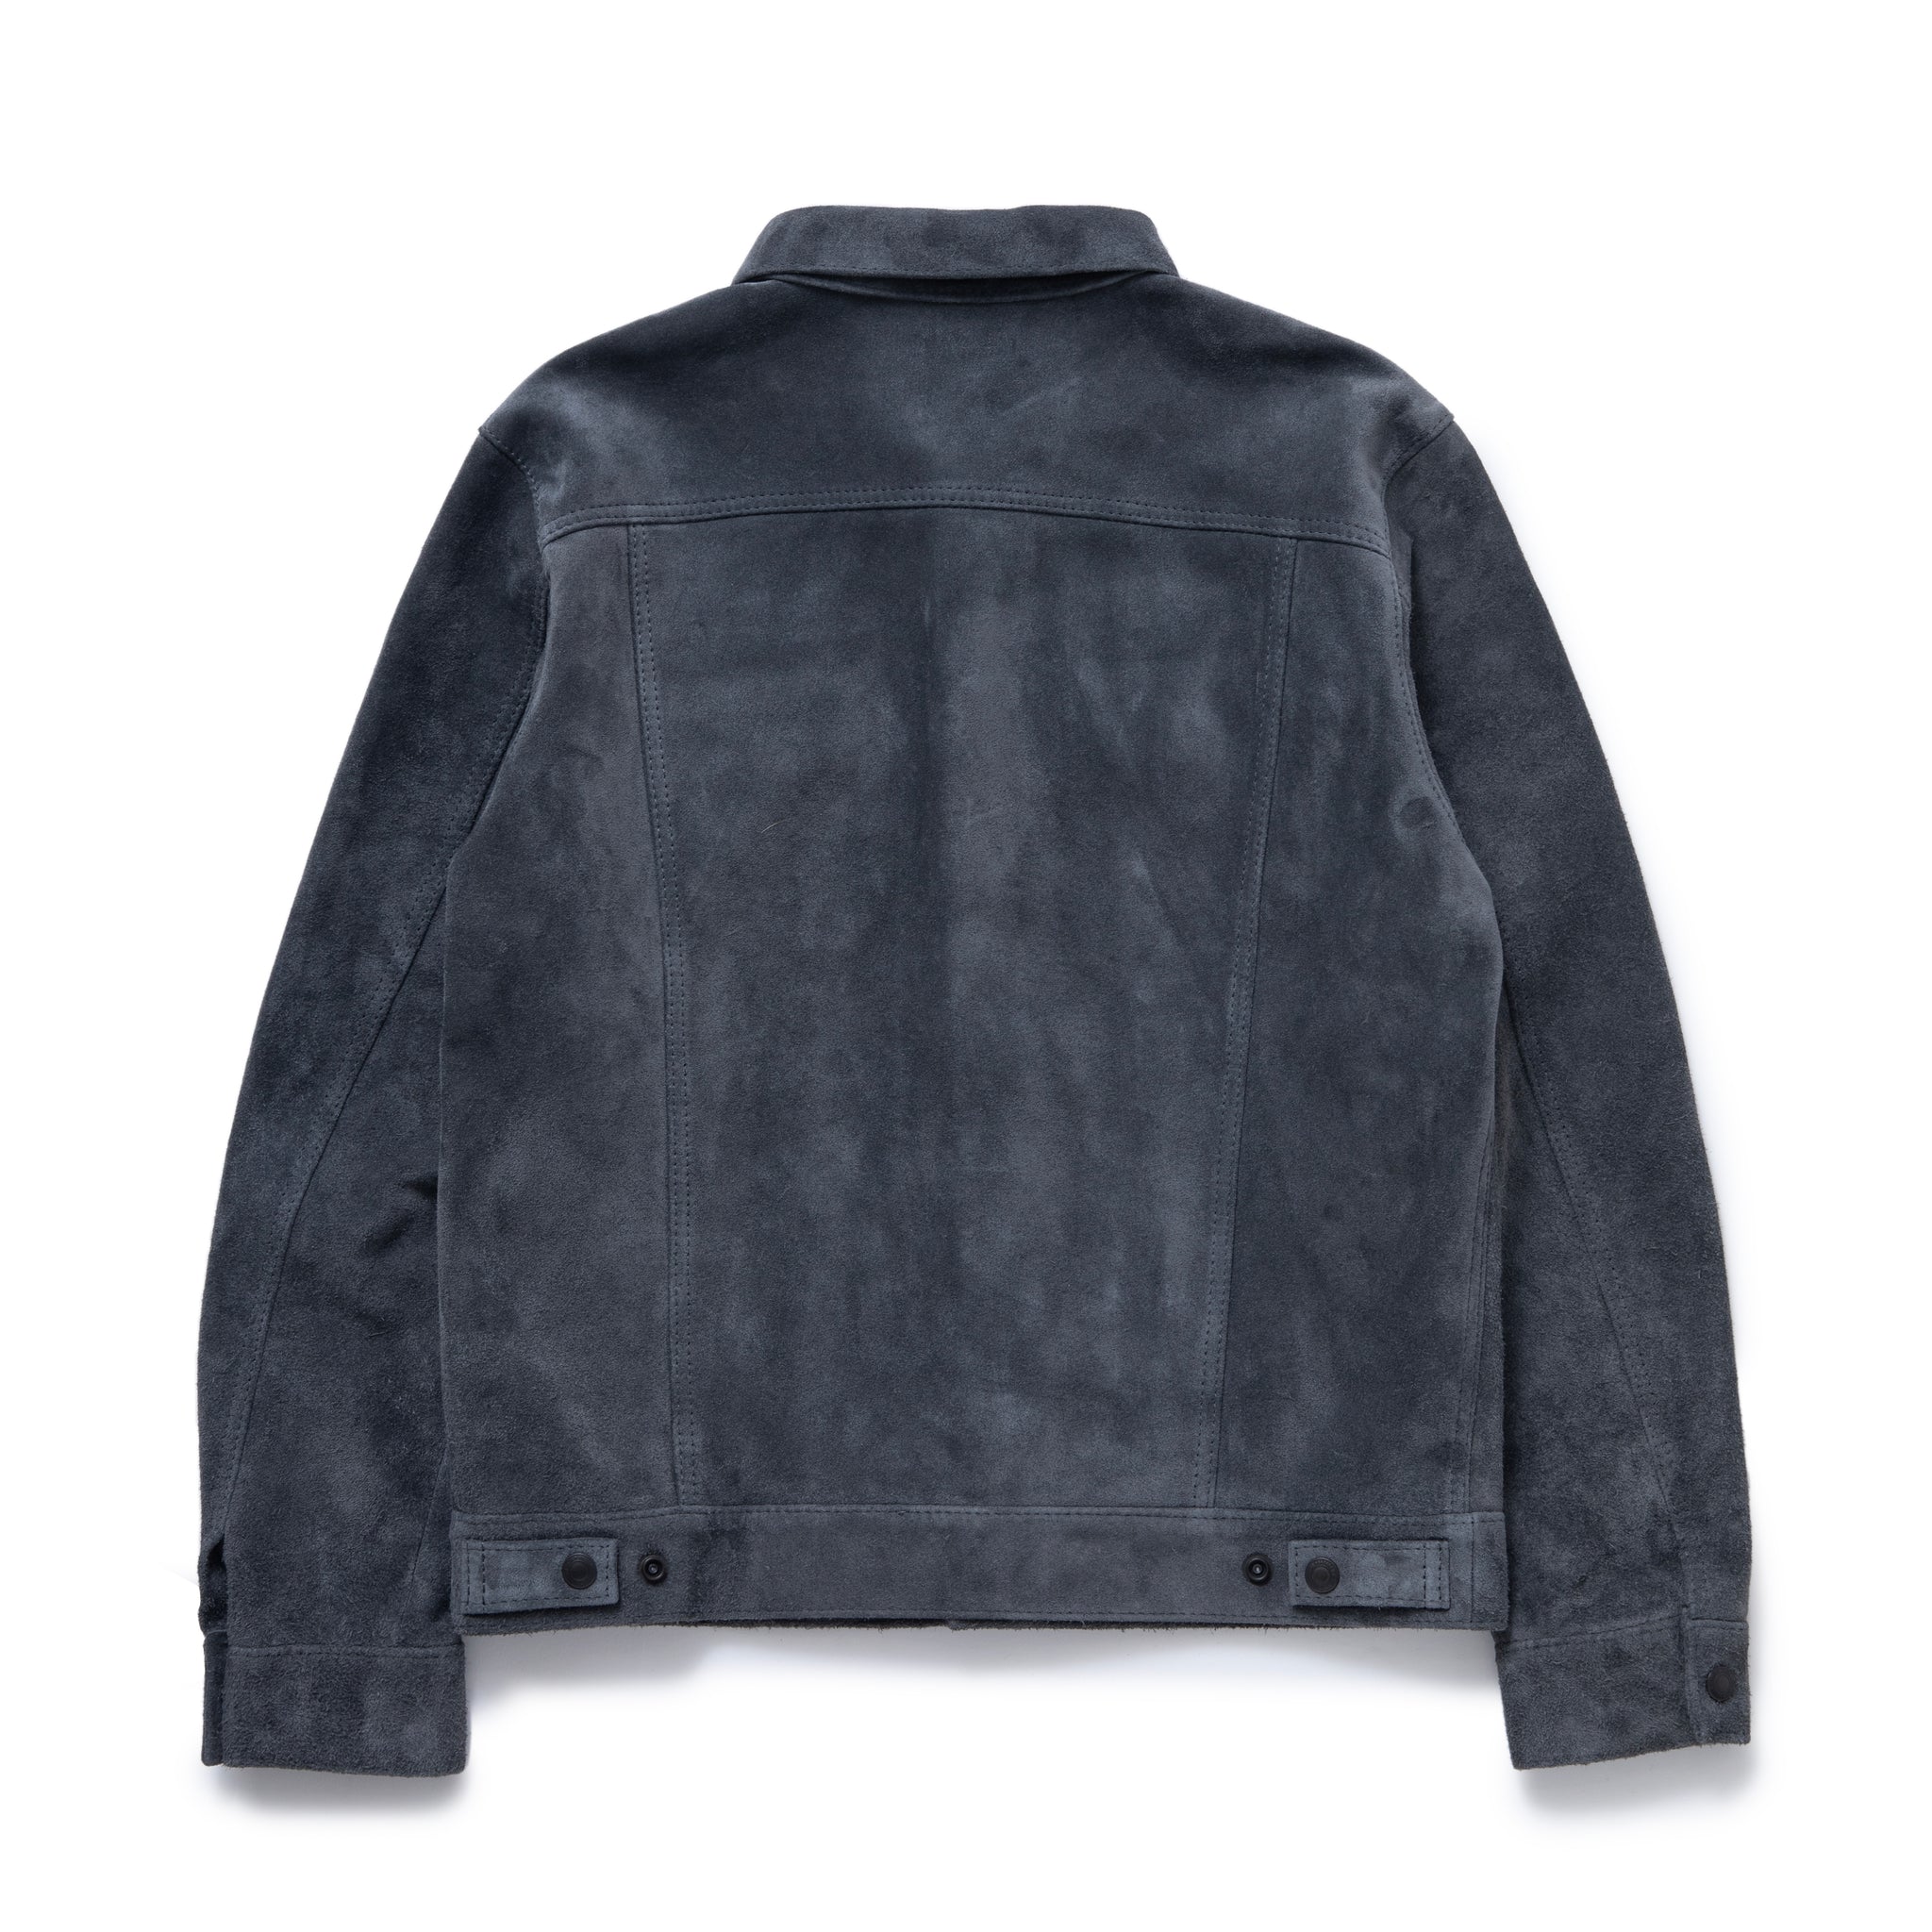 SUEDE LEATHER JKT – JOLLY ROGER